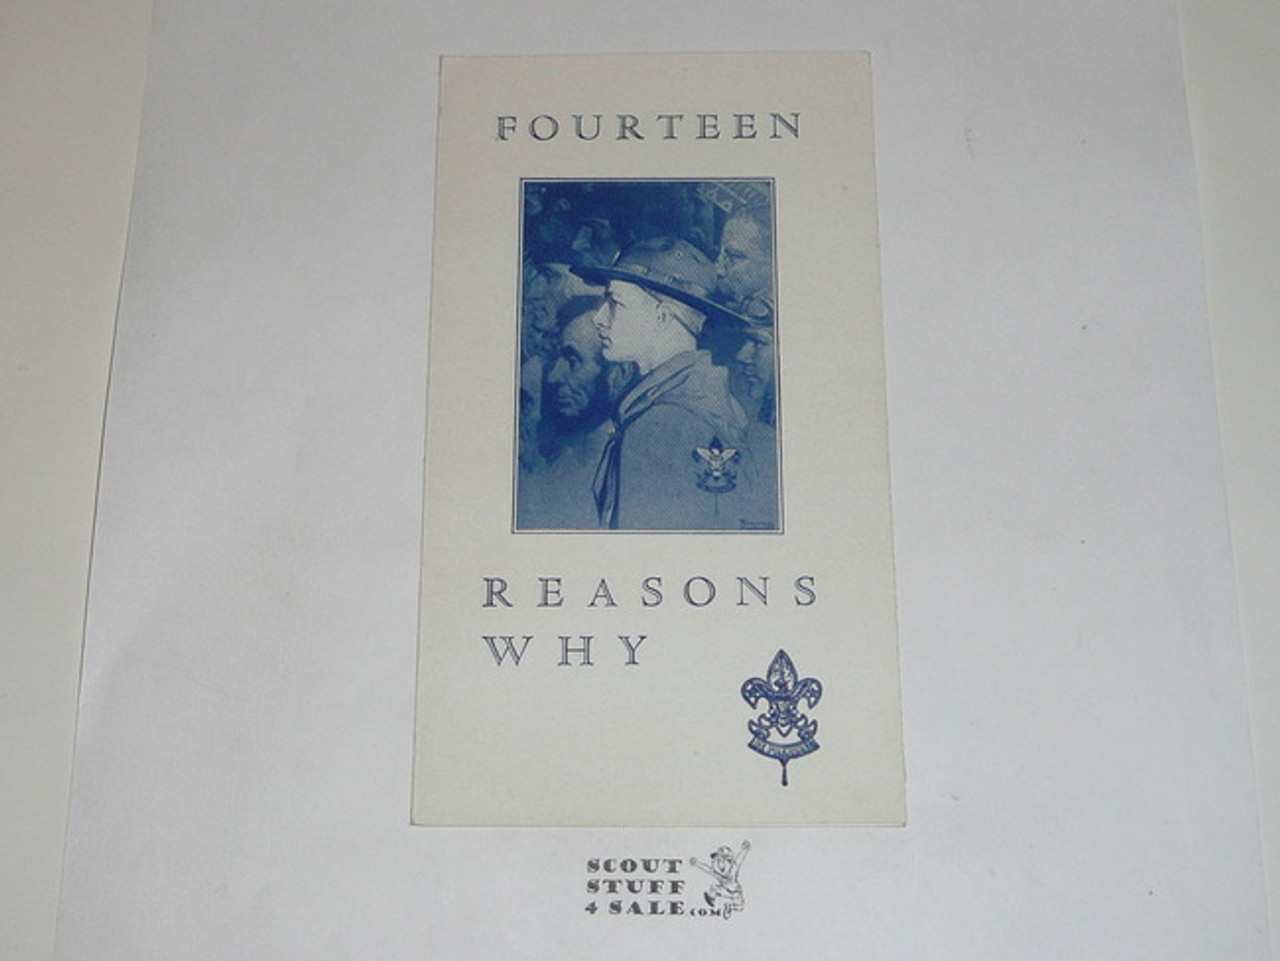 1942 Fourteen Reasons Why, Boy Scout Promotional Brochure, 7-42 printing